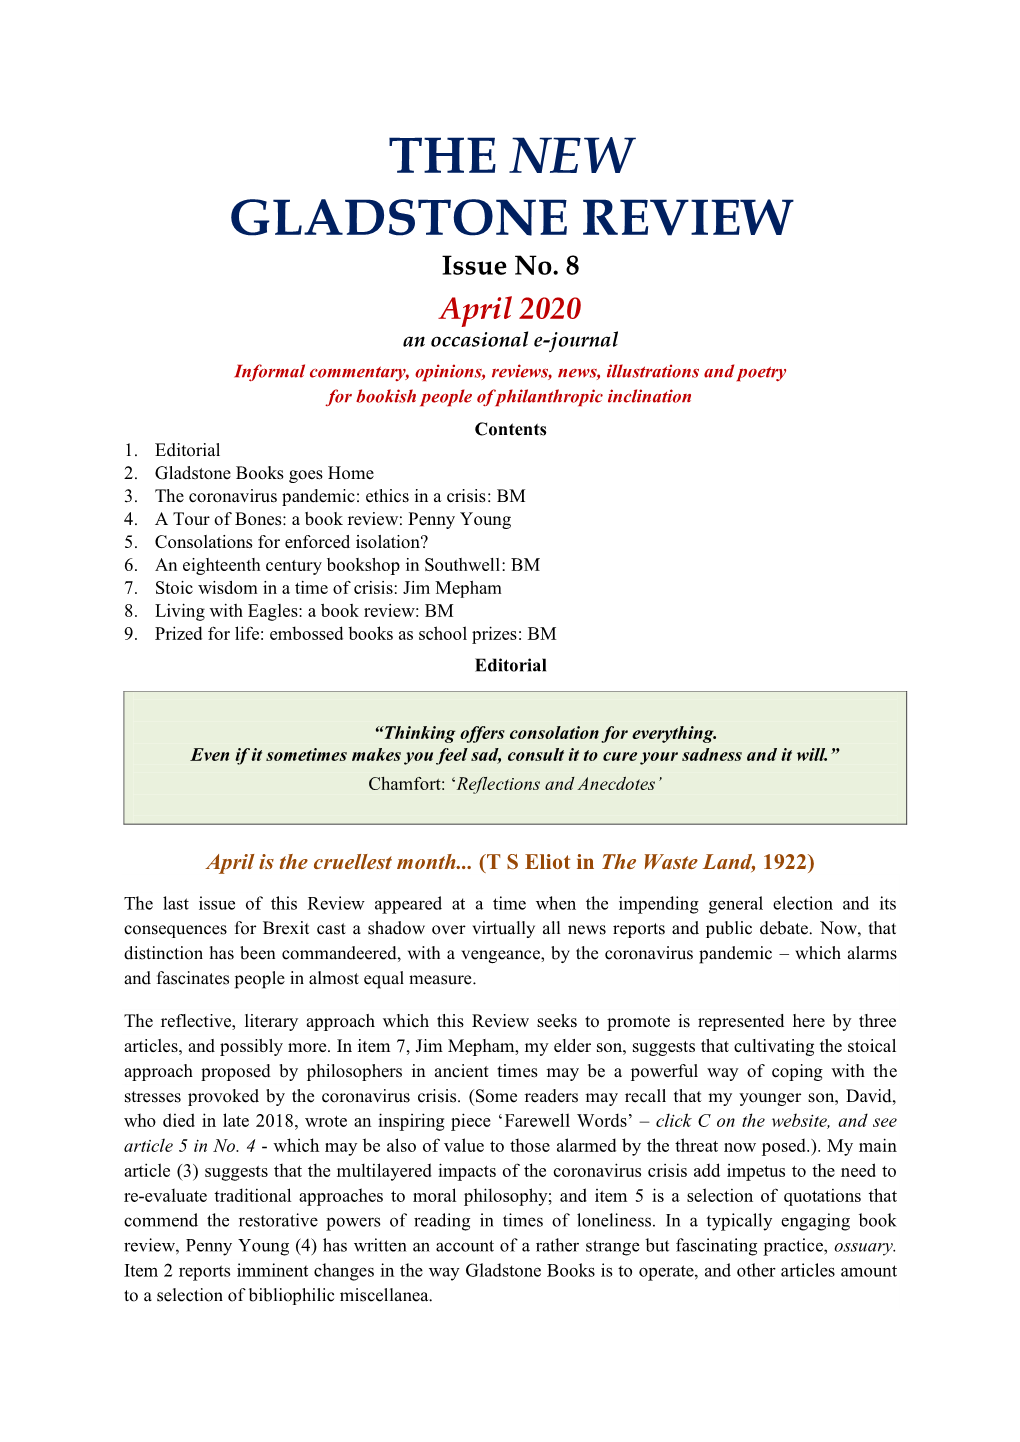 THE NEW GLADSTONE REVIEW Issue No